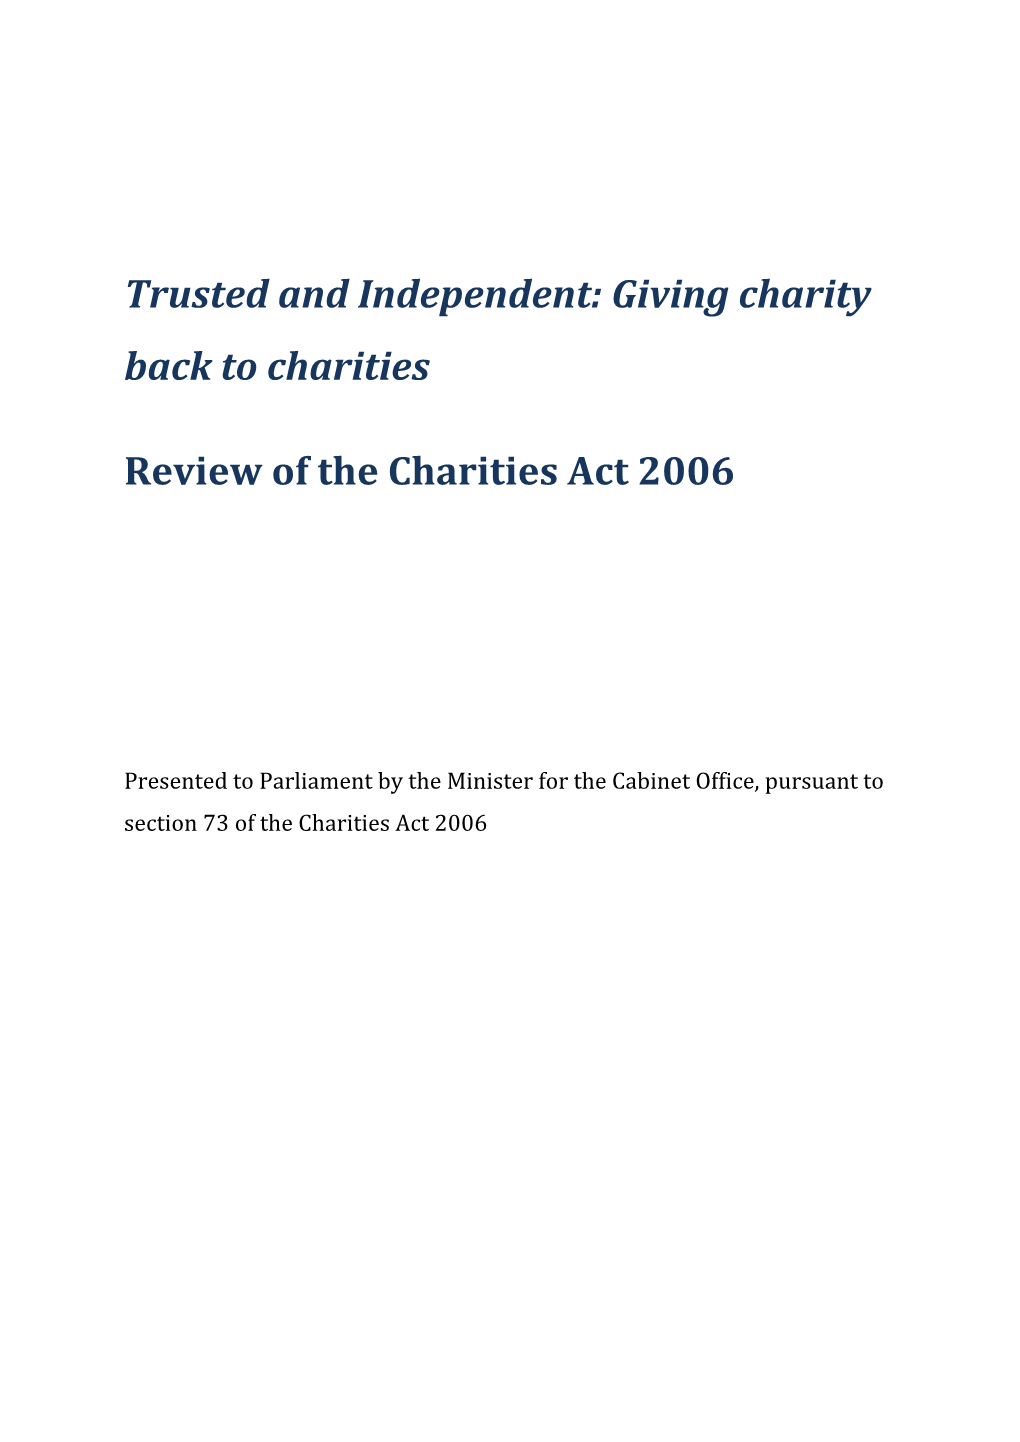 Trusted and Independent: Giving Charity Back to Charities Review of the Charities Act 2006